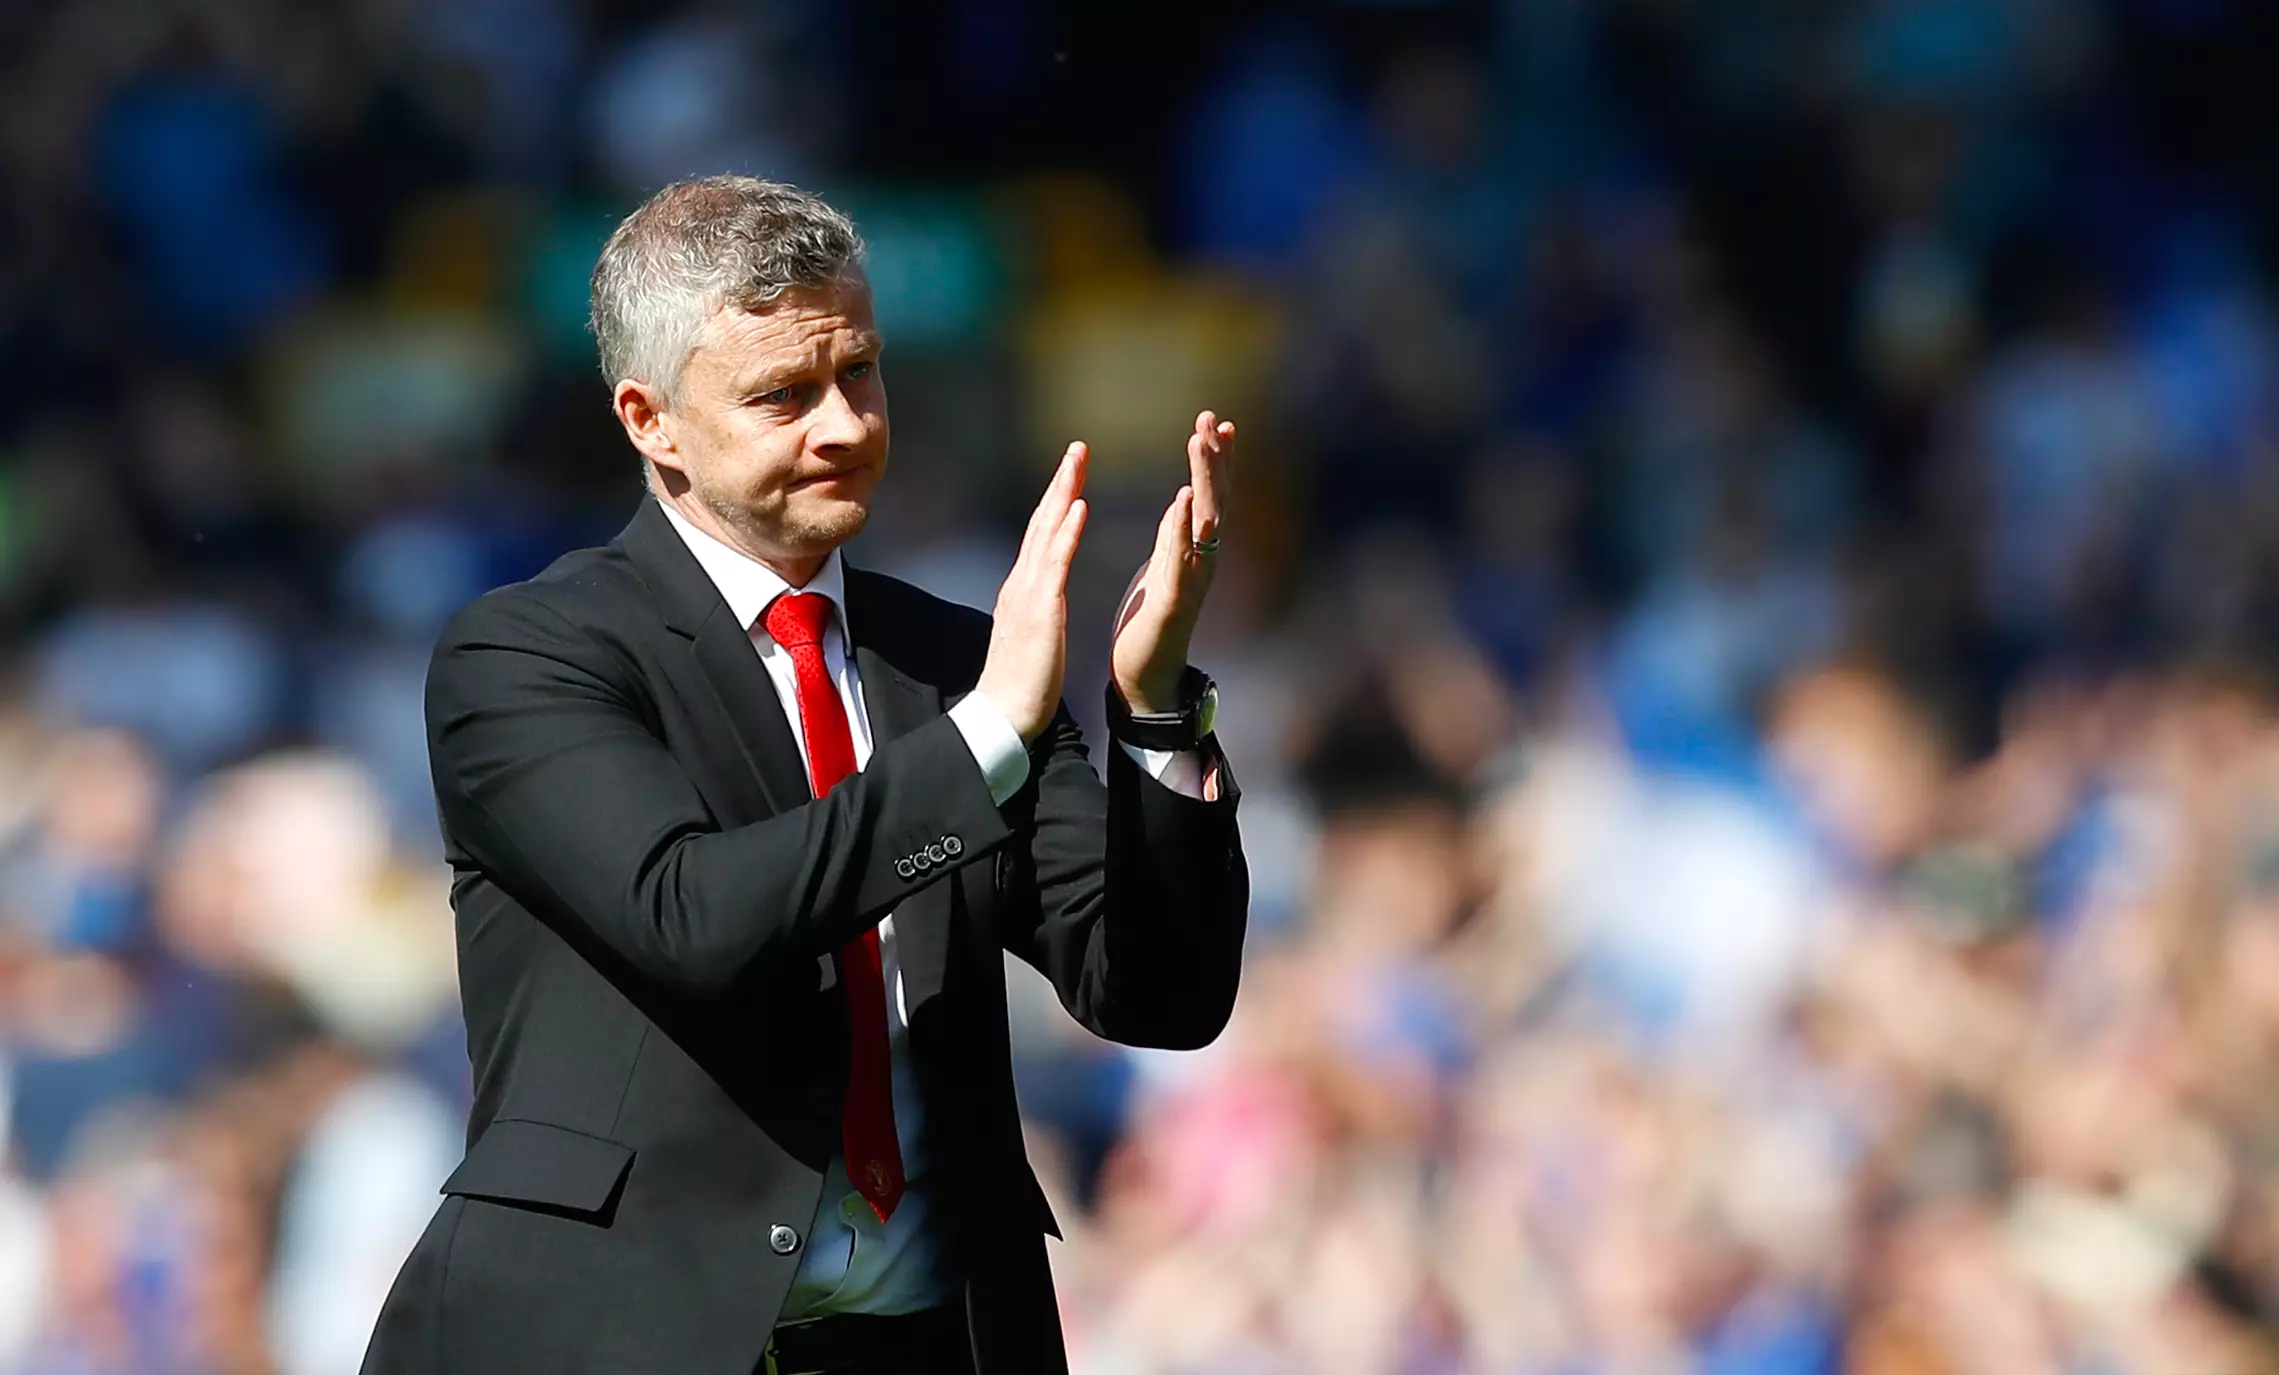 Solskjaer applauds the fans because the players didn't deserve it. Image: PA Images